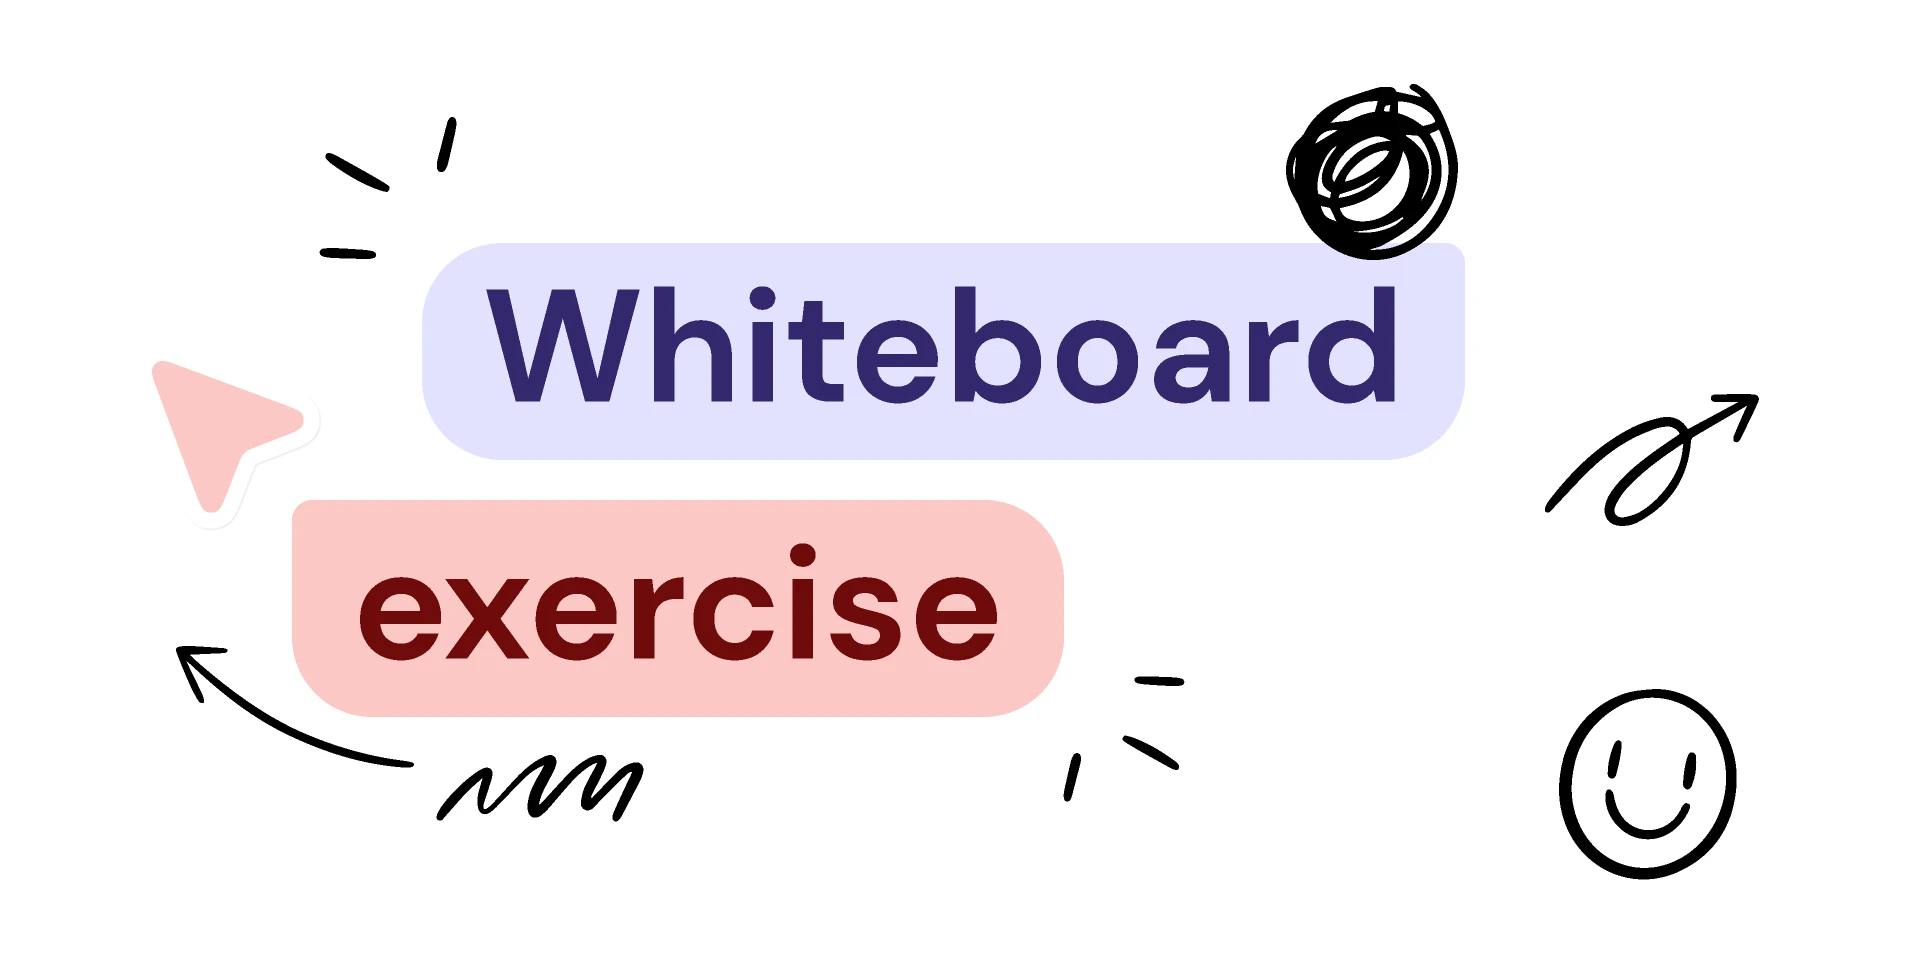 Whiteboard exercise for Figma and Adobe XD